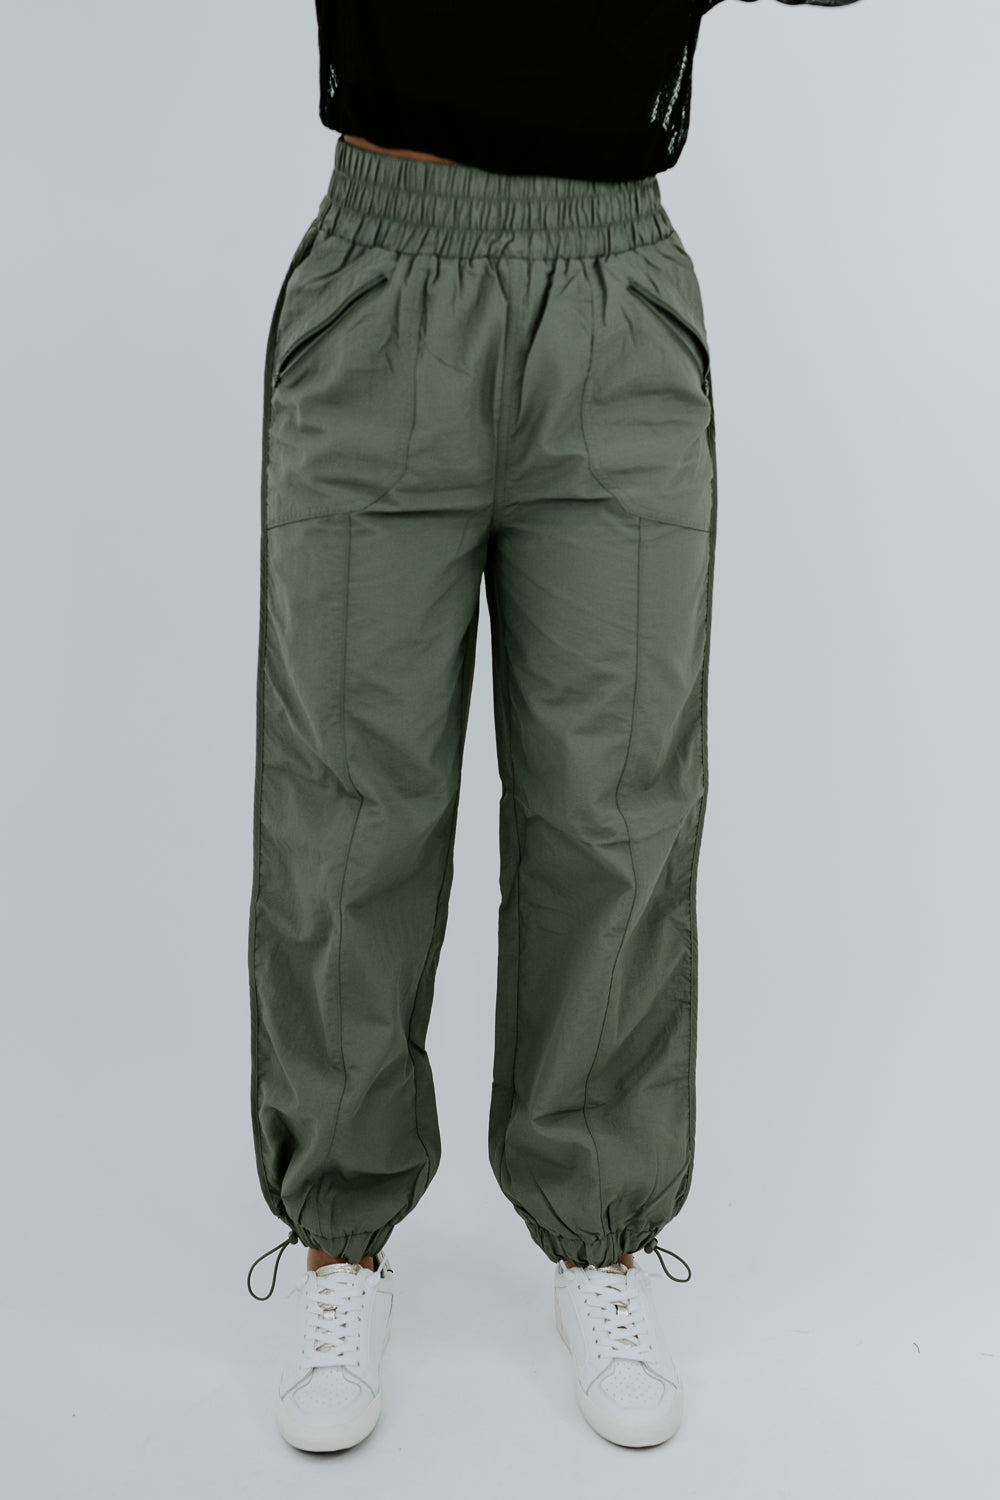 Take It To The Streets  Windbreaker Pant, Lt.Olive